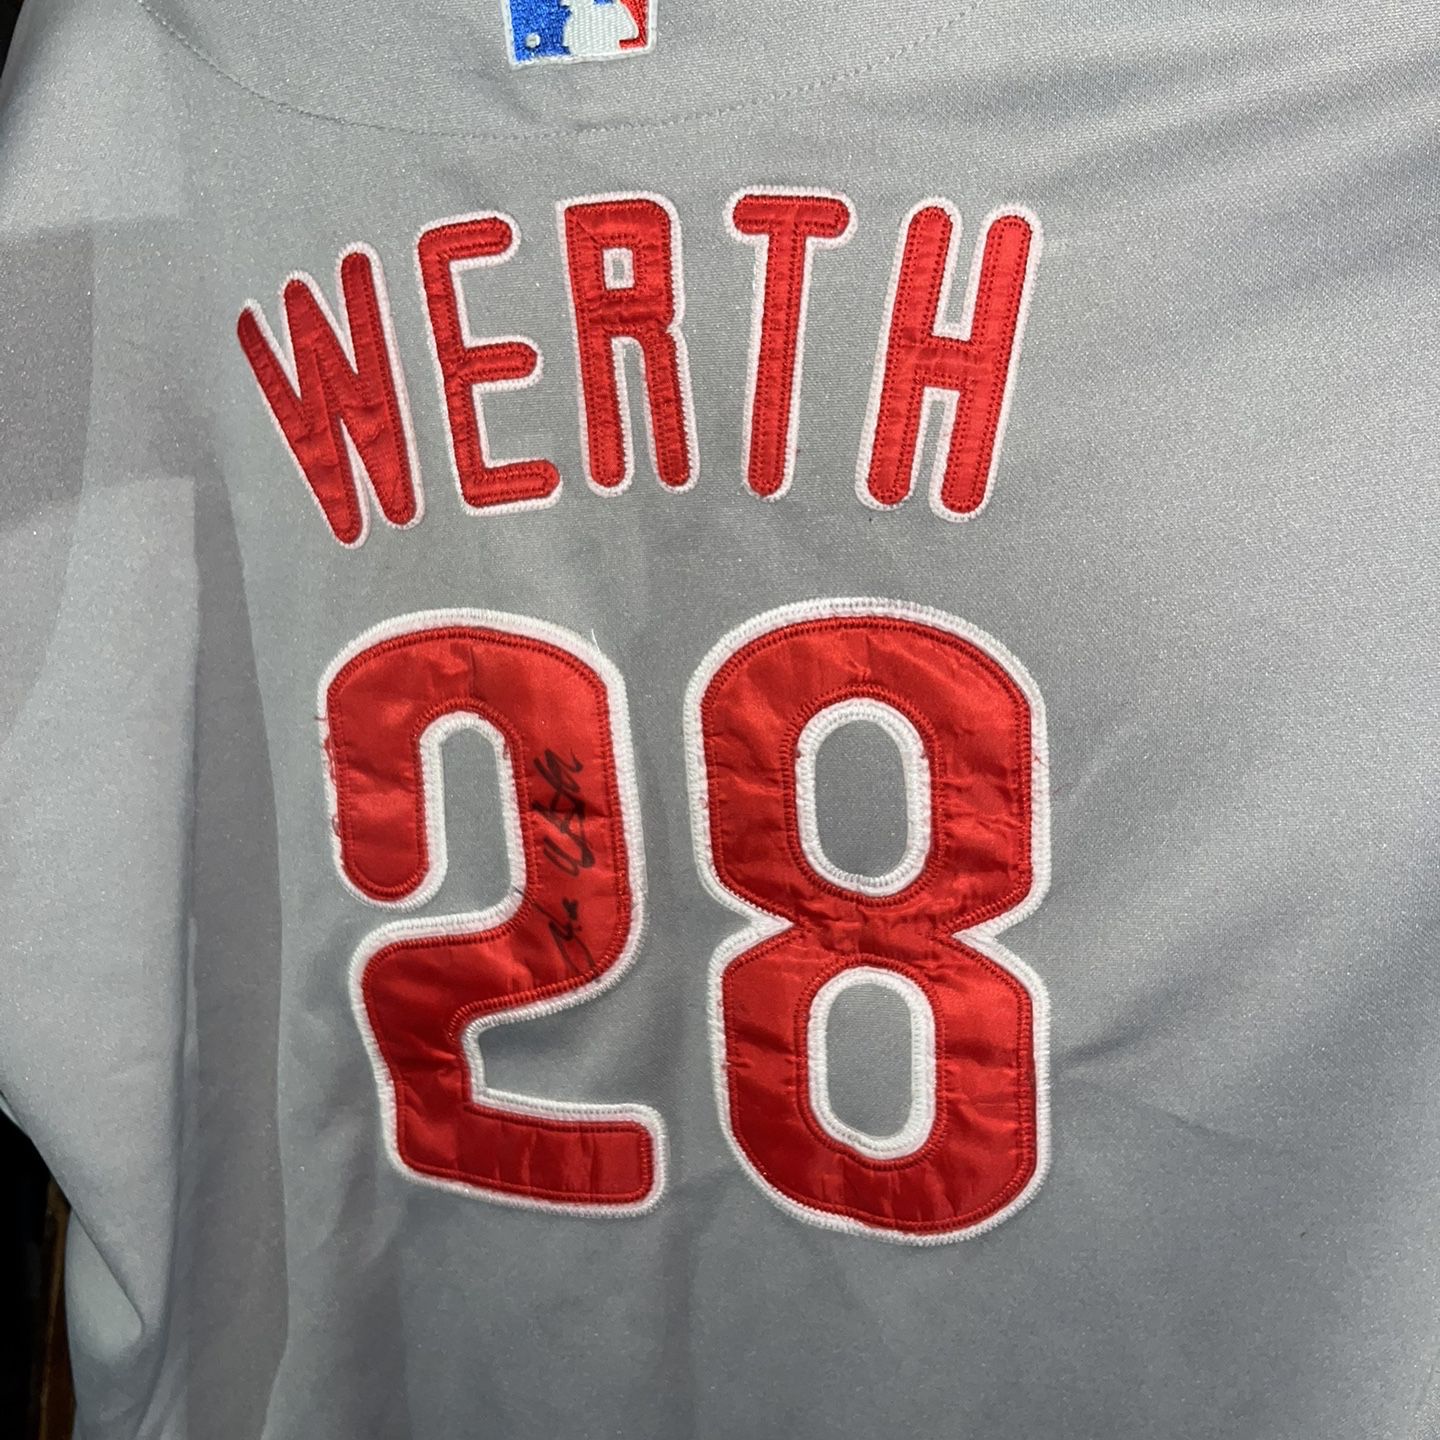 Jayson Werth Philadelphia Phillies Majestic Gray Road Jersey Men's Size L  for Sale in Lindenhurst, NY - OfferUp